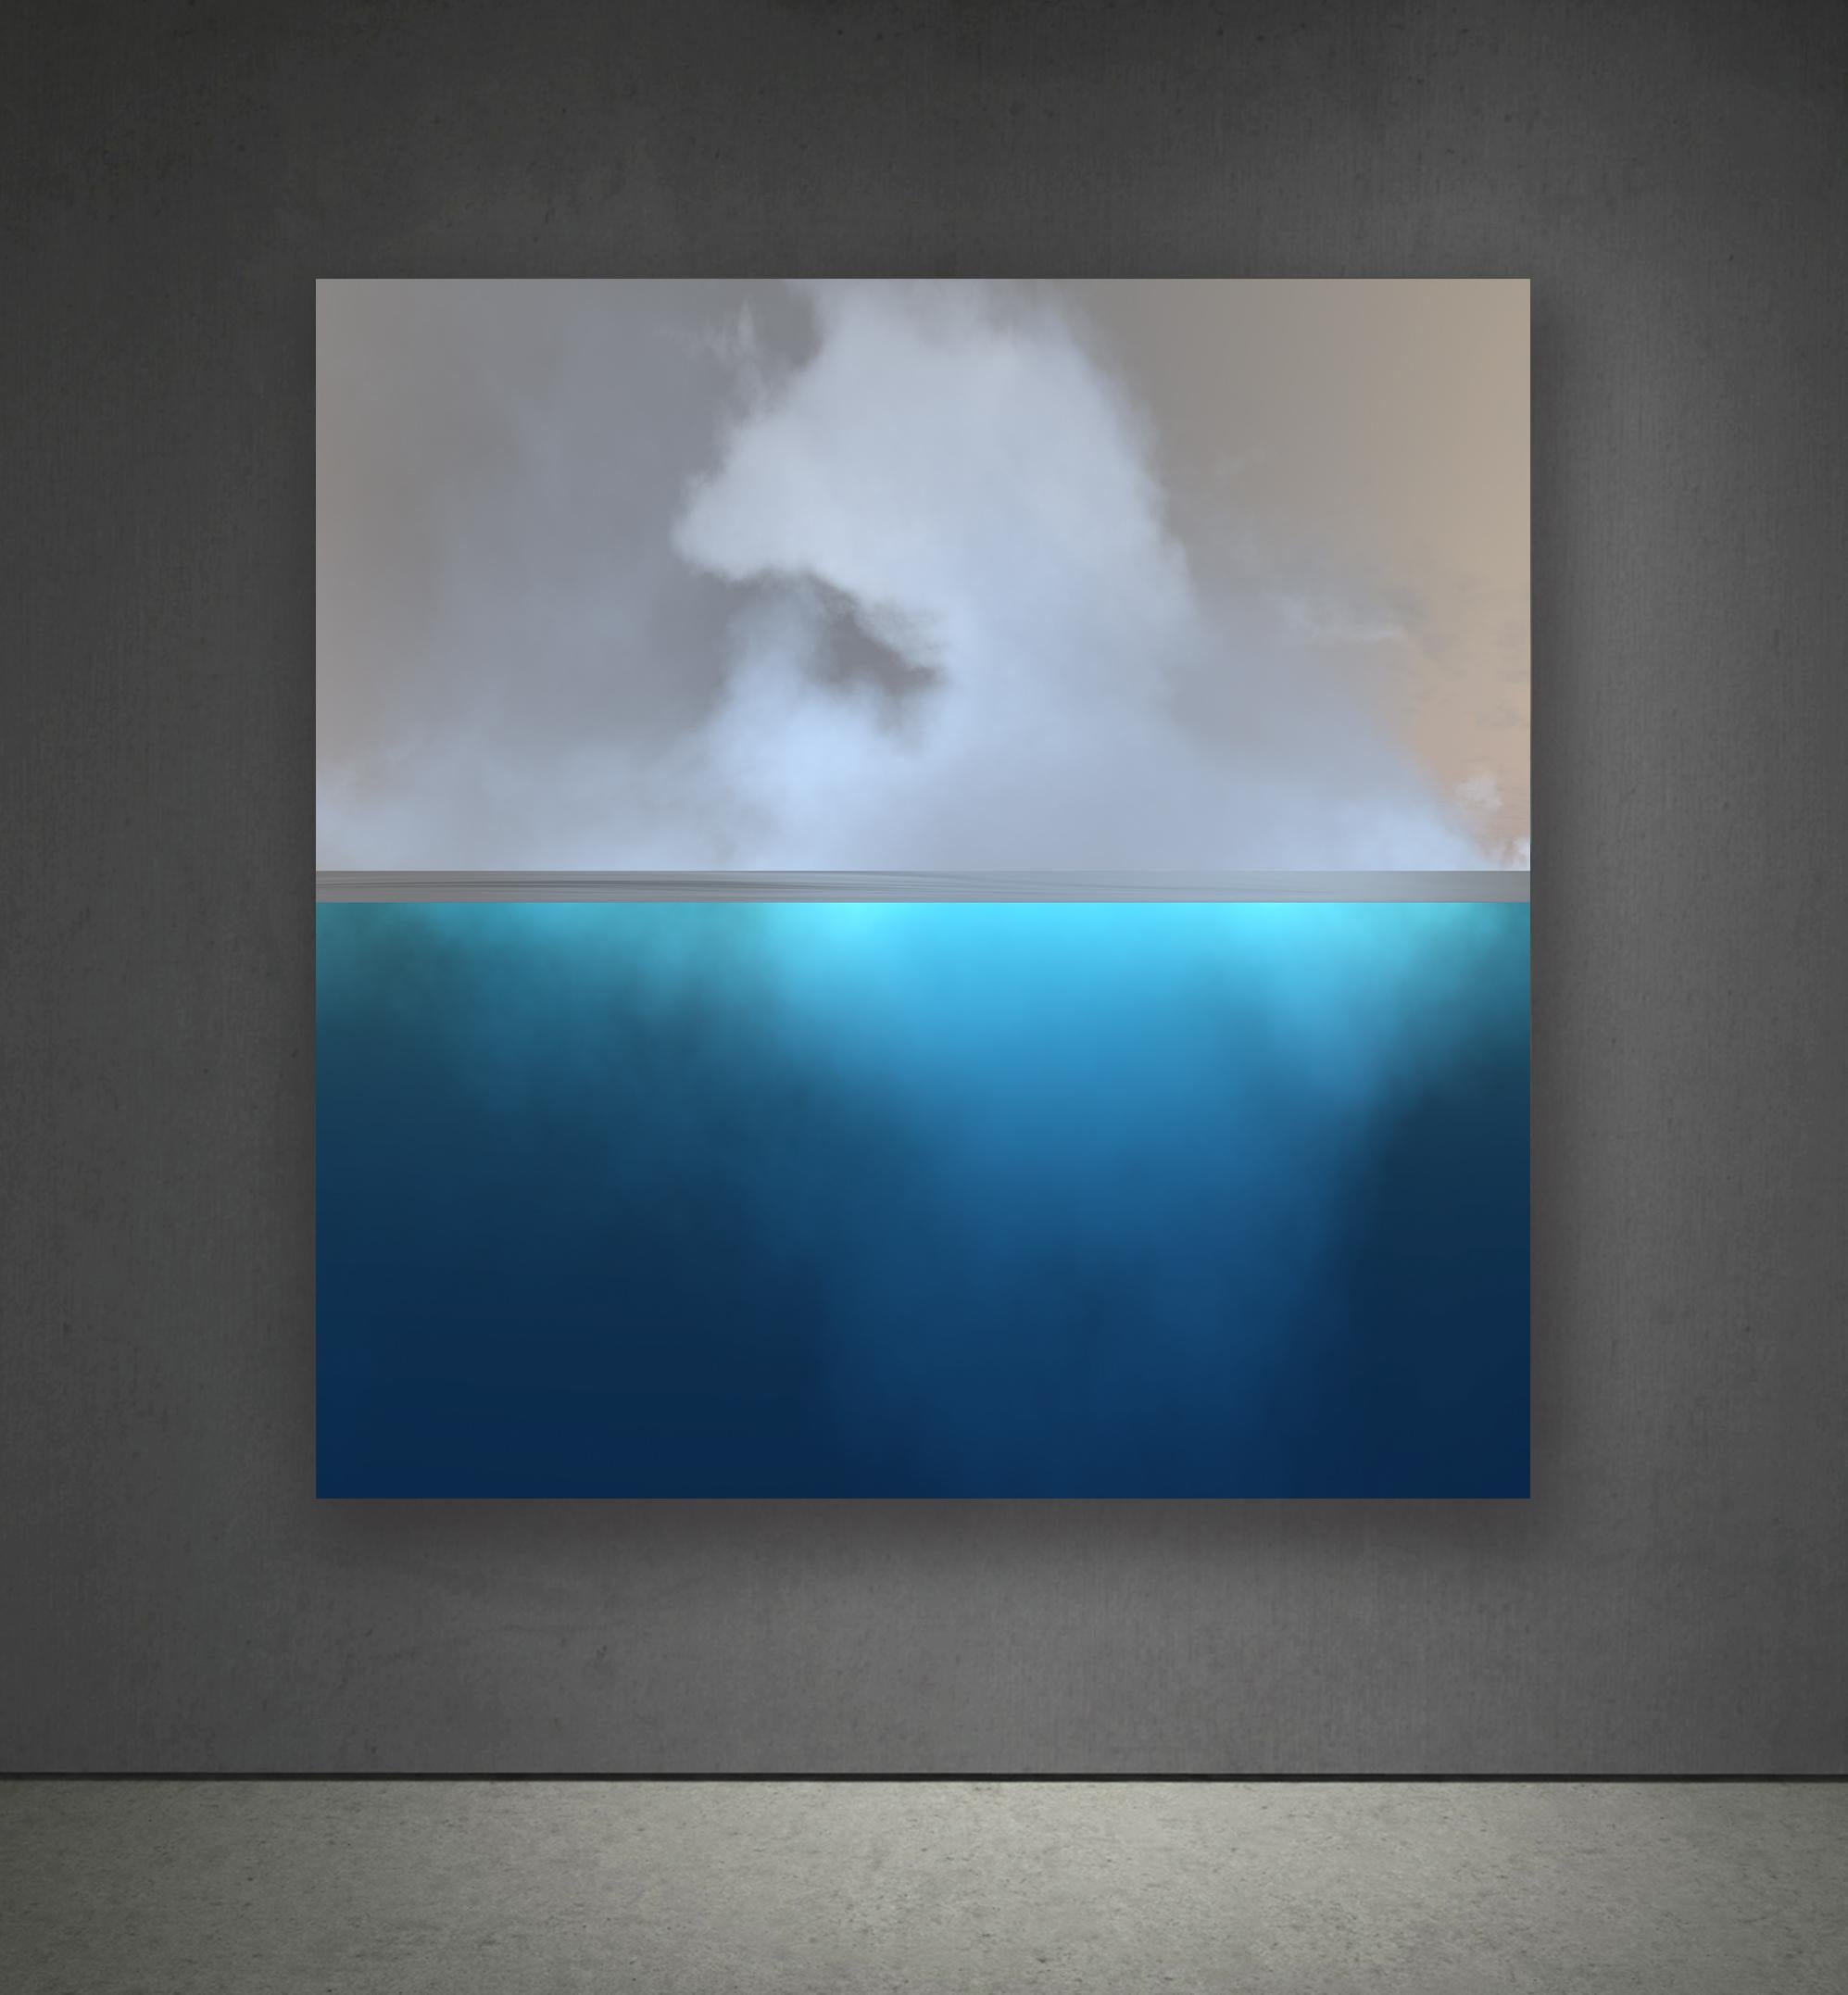 Triptych Clouds - Underwater World in Nuances of Blue - Abstract Seascapes - Contemporary Photograph by Paul-Émile Rioux